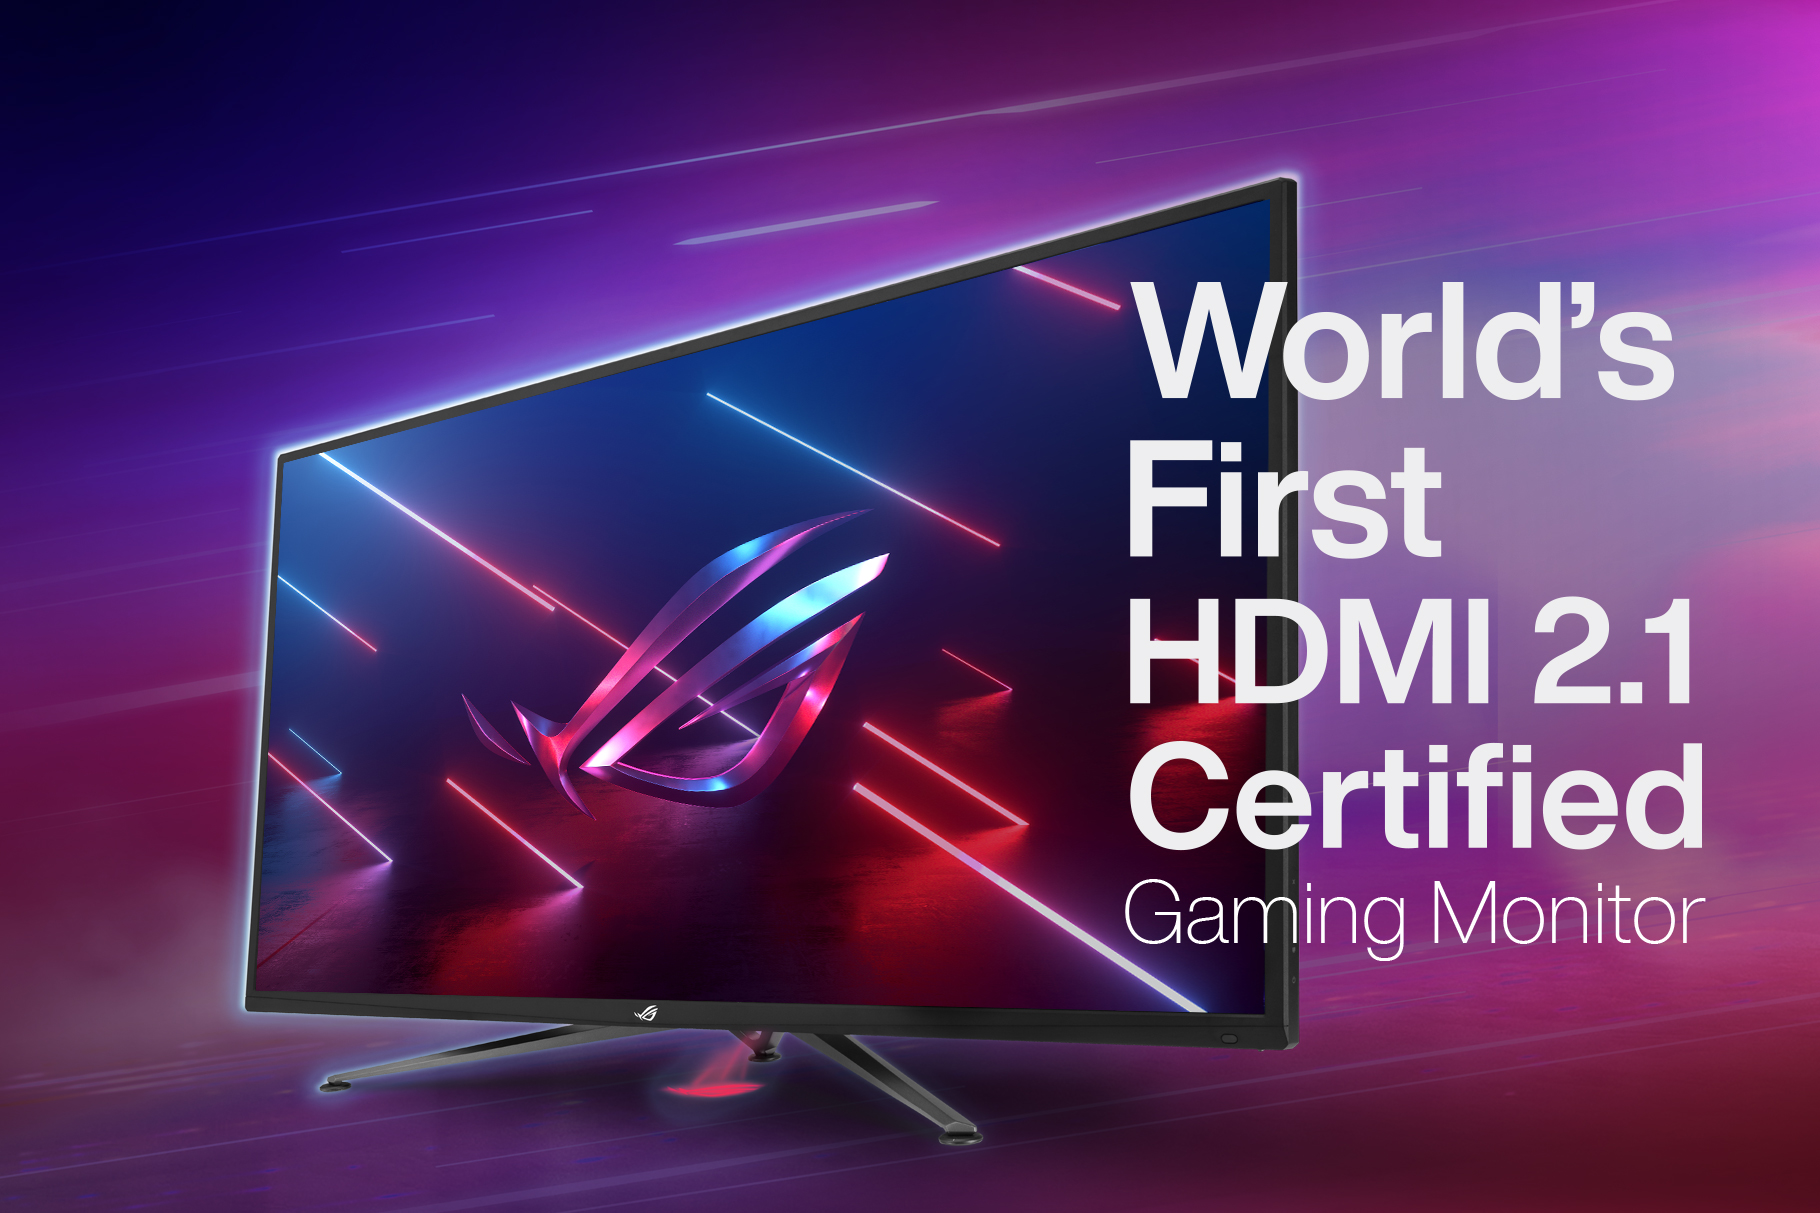 ASUS ROG announces world's first HDMI 2.1-certified 4K 120Hz gaming monitor  